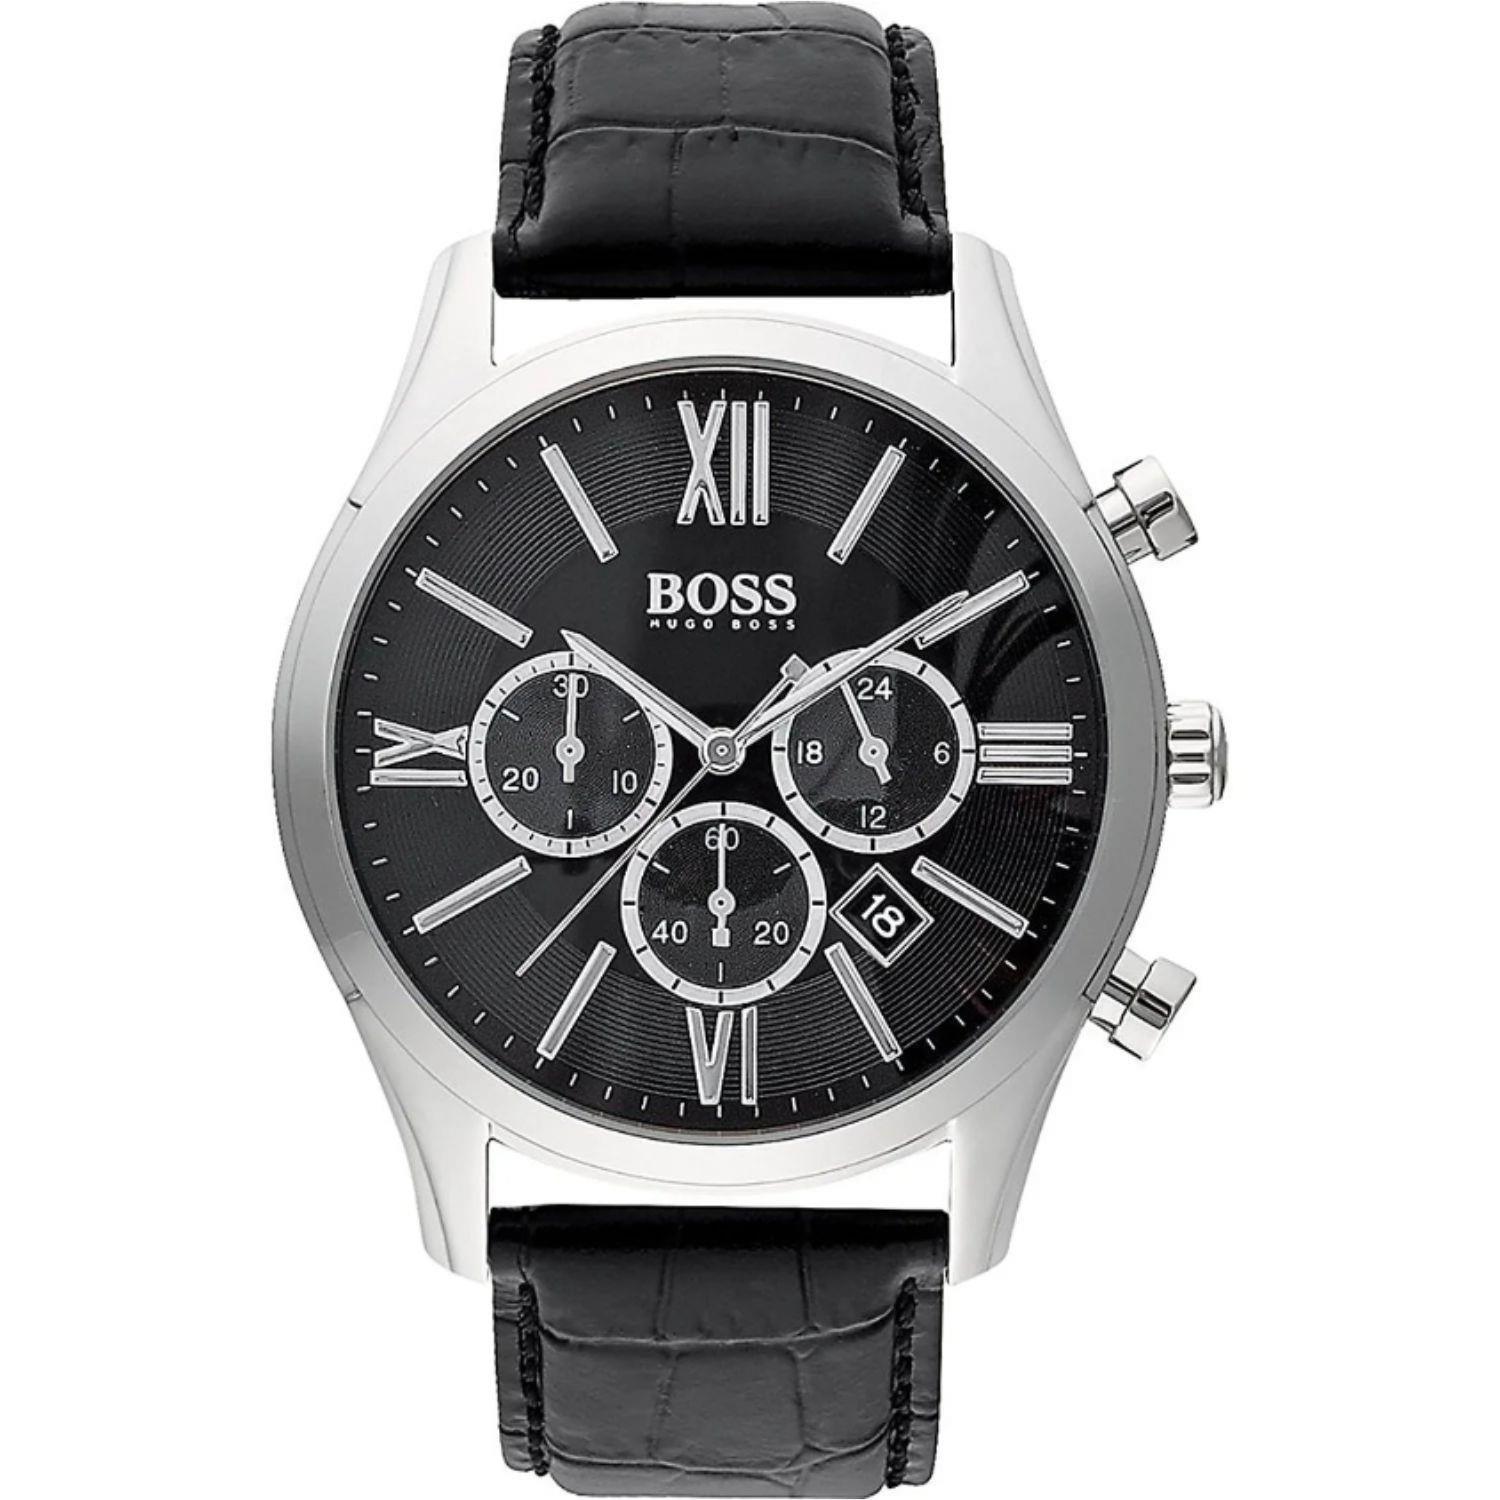 Chronograph Watches For Men - Watch Home™